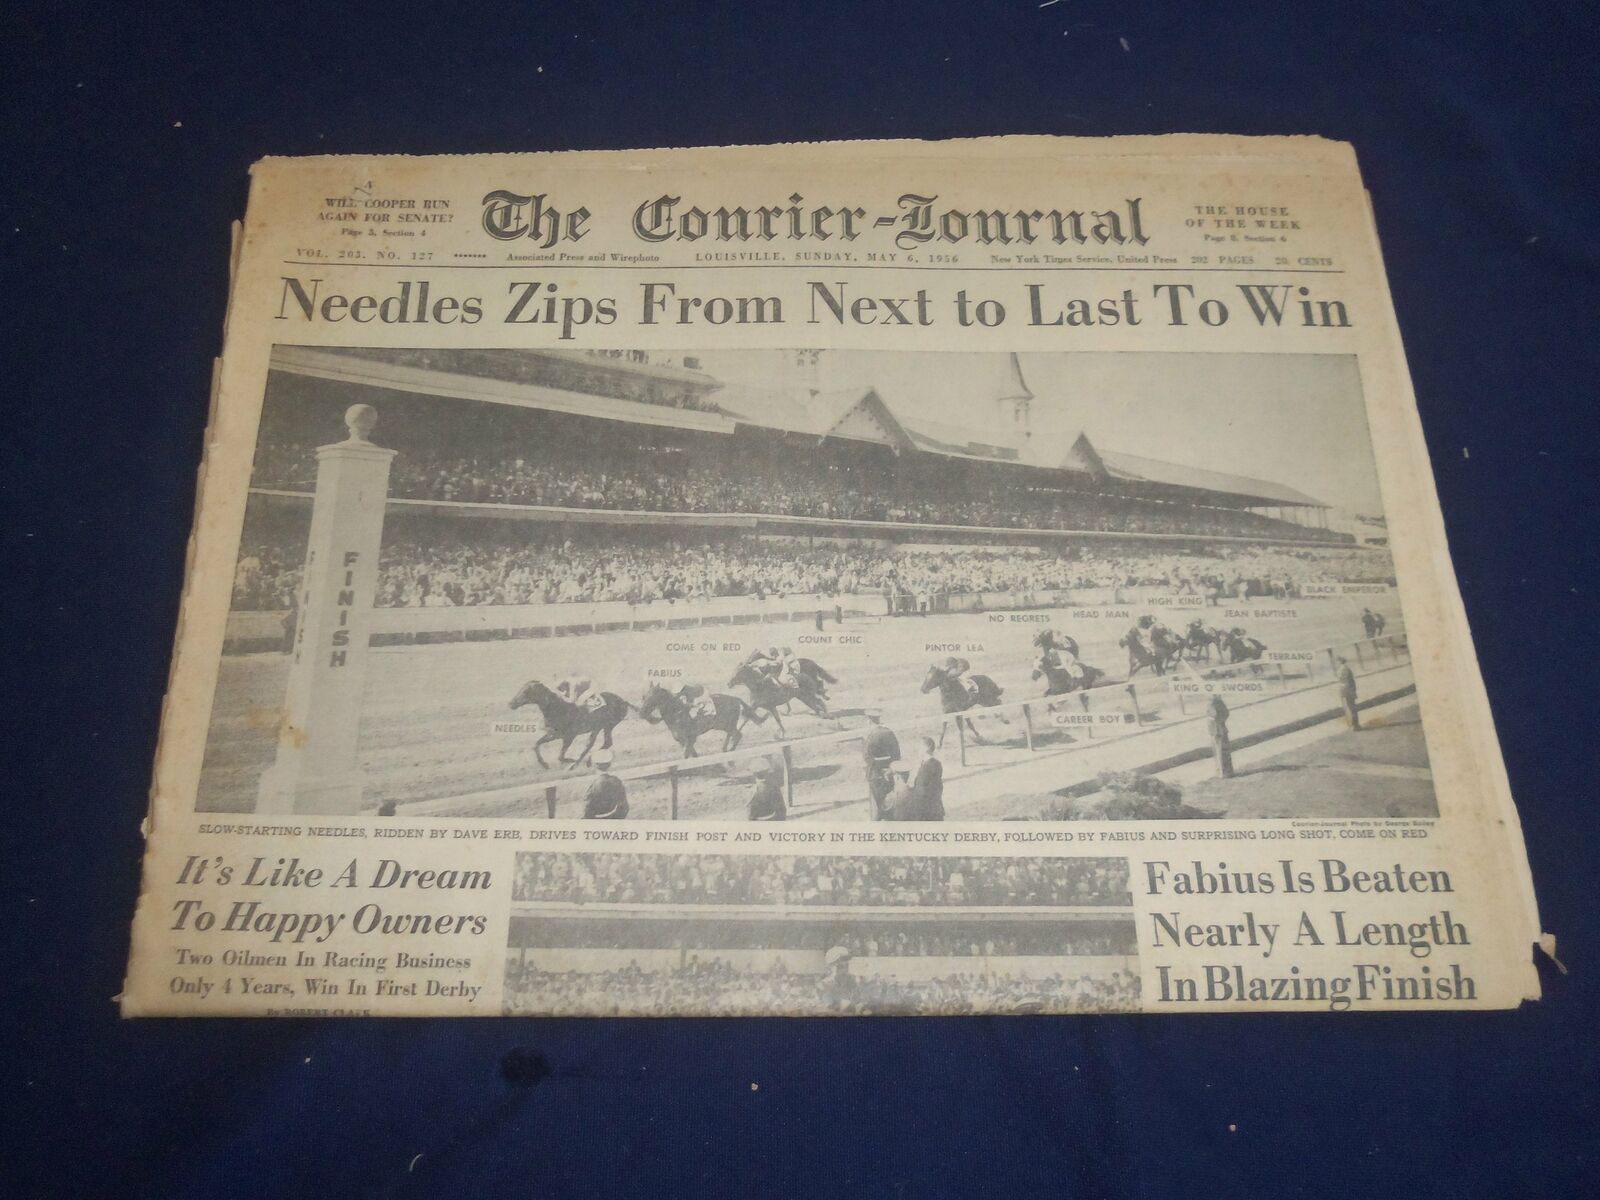 1956 MAY 6 THE COURIER-JOURNAL NEWSPAPER - NEEDLES WINS KENTUCKY DERBY - NP 5587